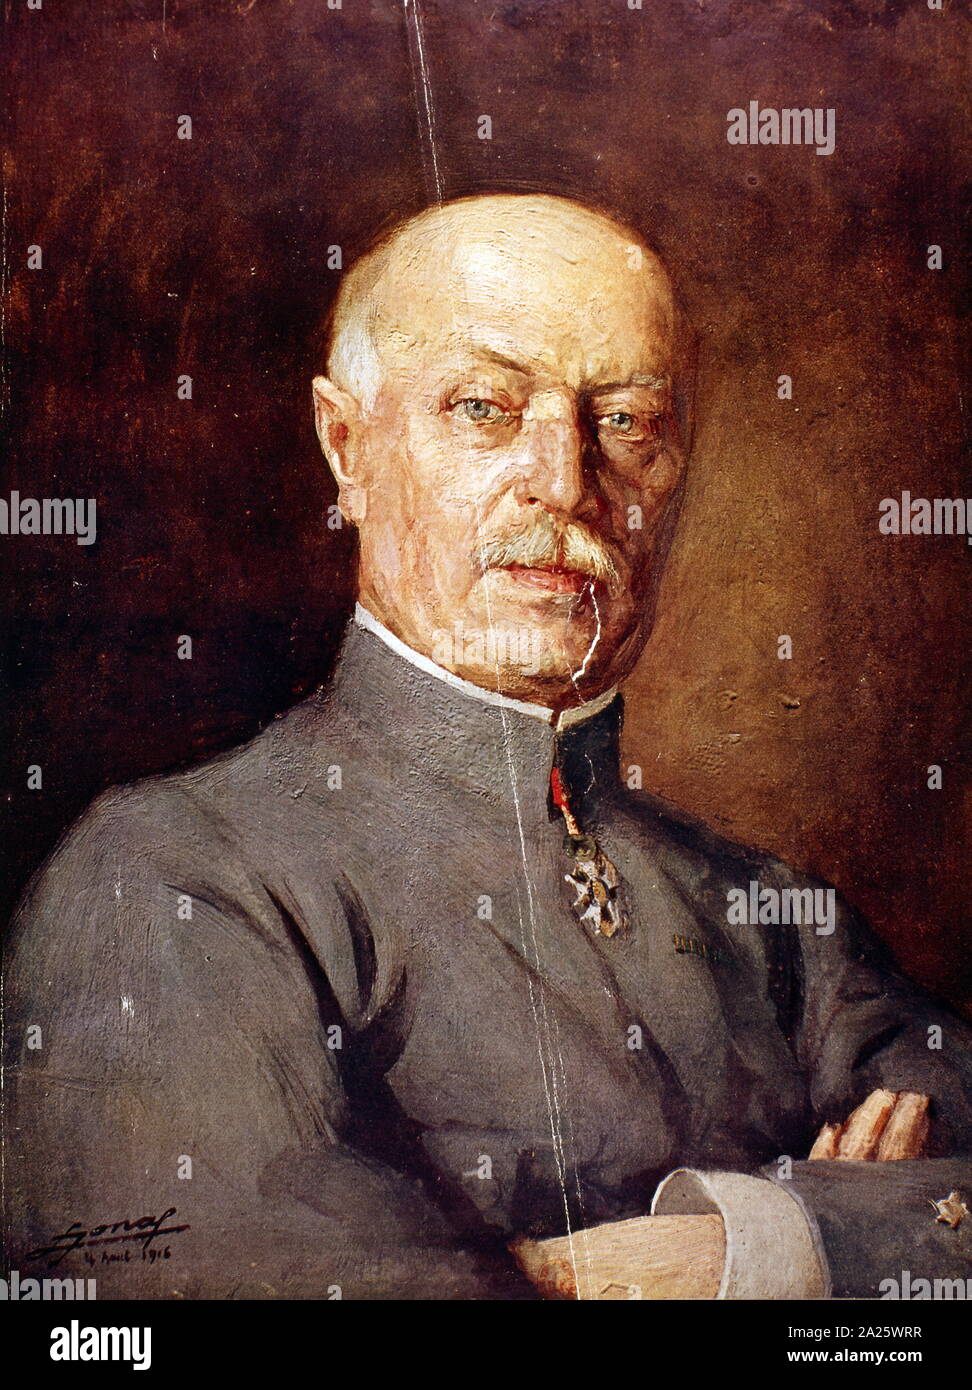 Portrait of Emile Fayolle (1852–1928), a Marshal of France. In 1916, Fayolle was given command of the Sixth Army, which he commanded at the battle of the Somme, under the command of Ferdinand Foch's Northern Army Group. Stock Photo